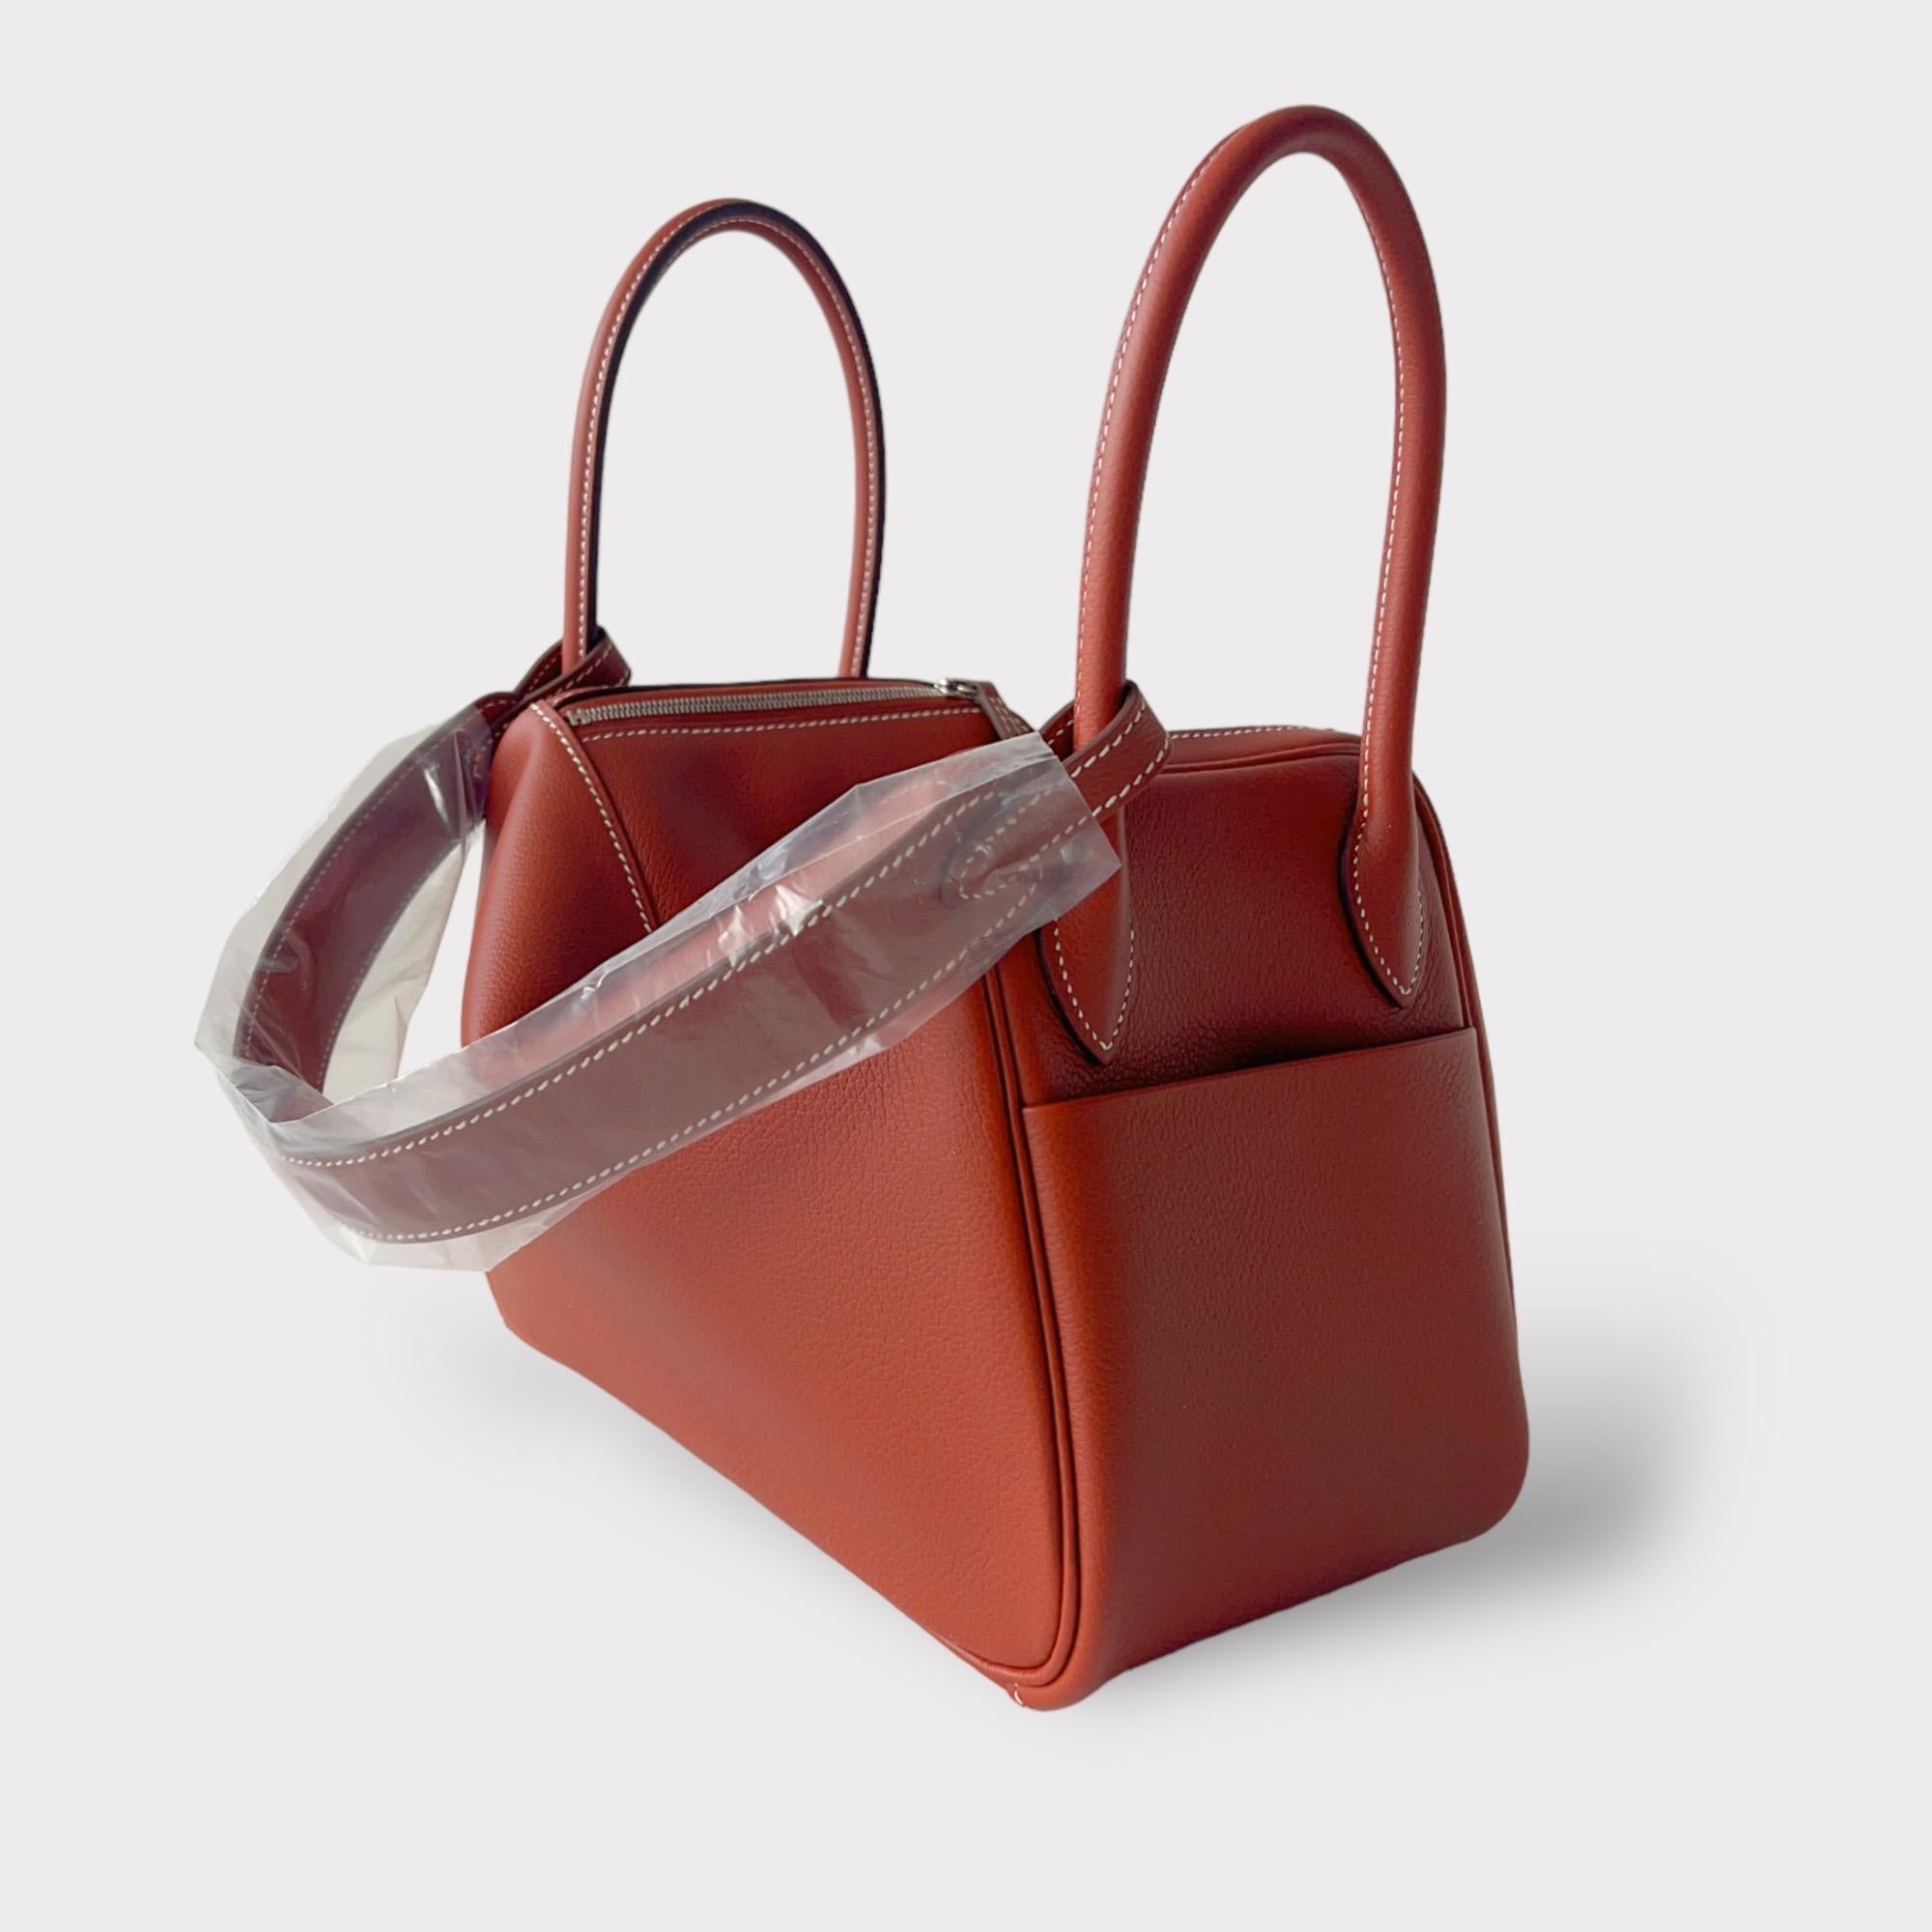 Hermes Lindy 26 Bag In Sienne With Palladium Hardware, Evercolor Leather 2